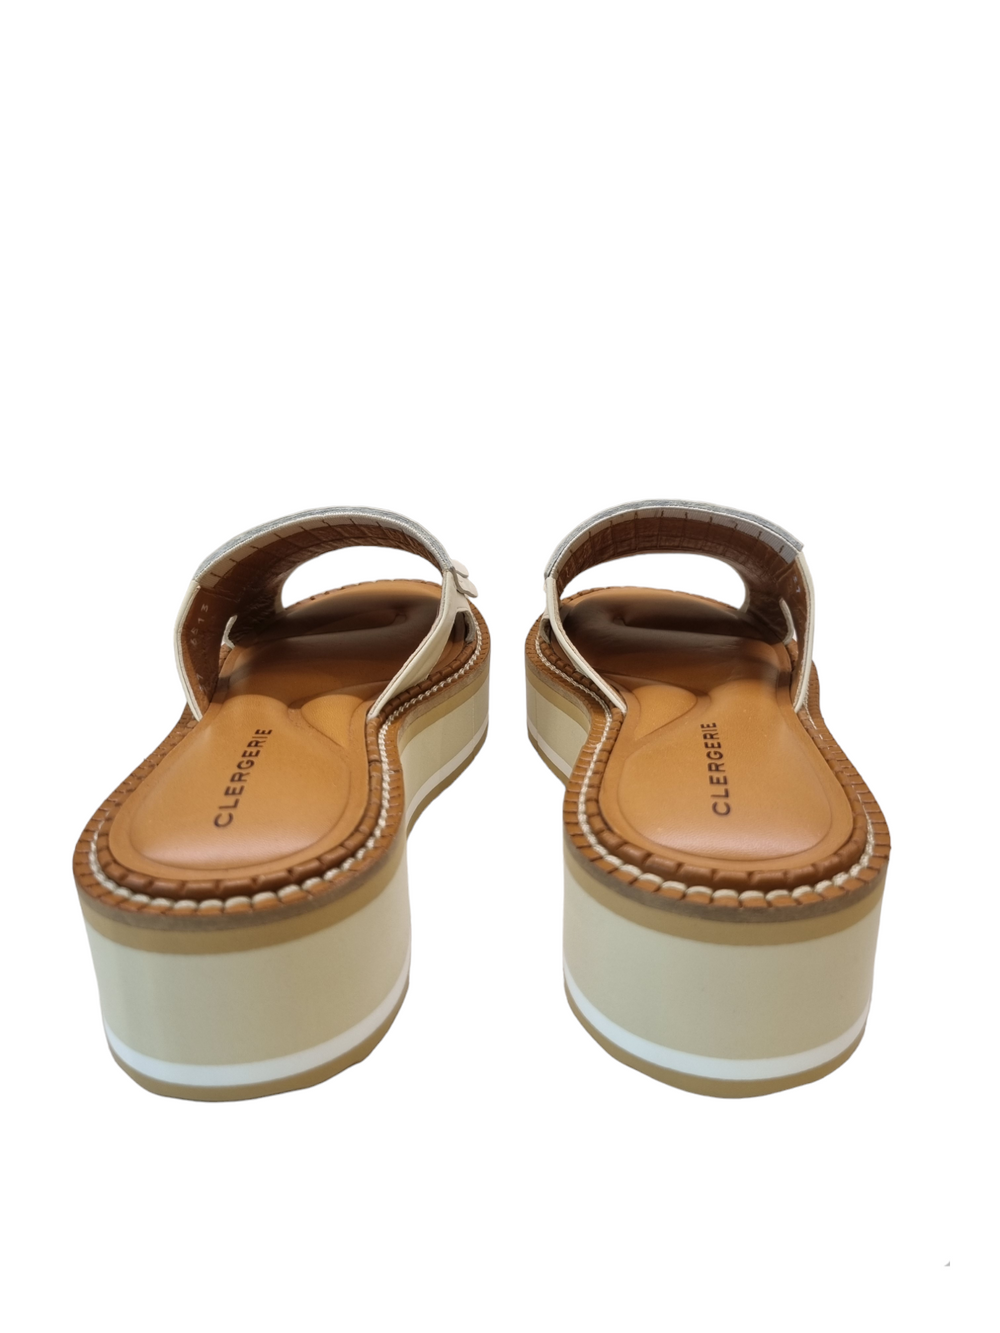 Fama Ivory Slip-On Sandals - Clergerie - Liberty Shoes Australia